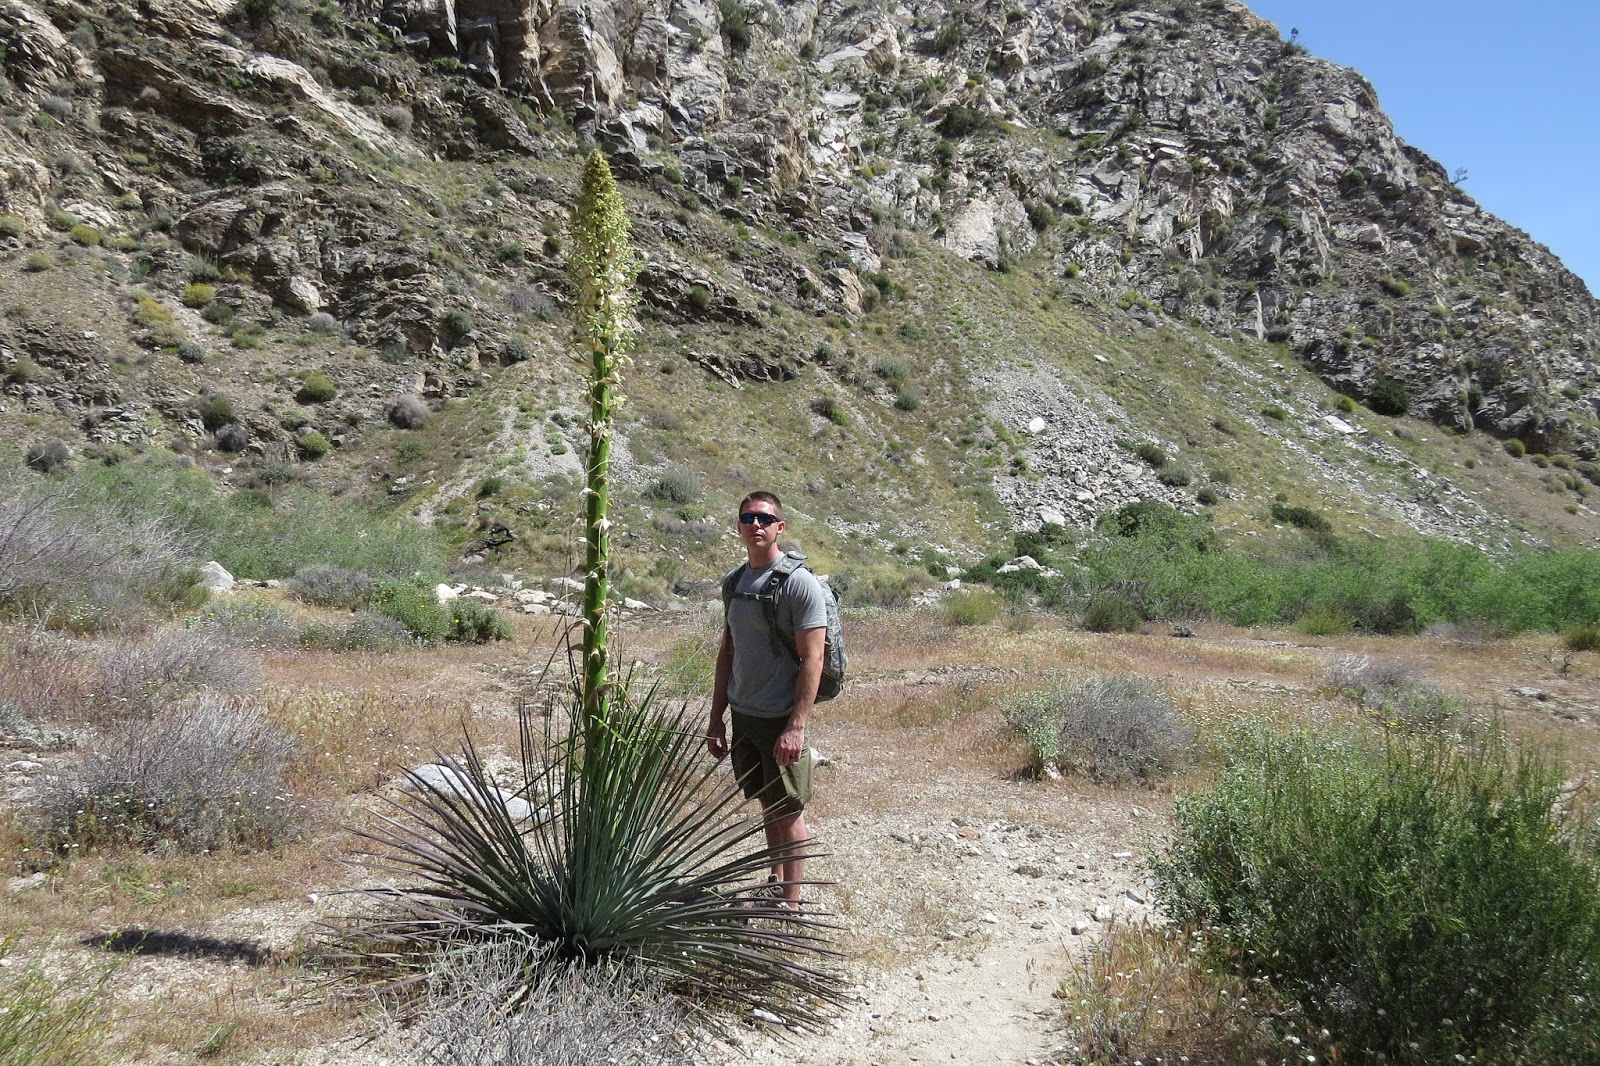 Palm Desert California, Whitewater Canyon Painted Trail Hike at Whitewater Preserve, Aunie Sauce Travels